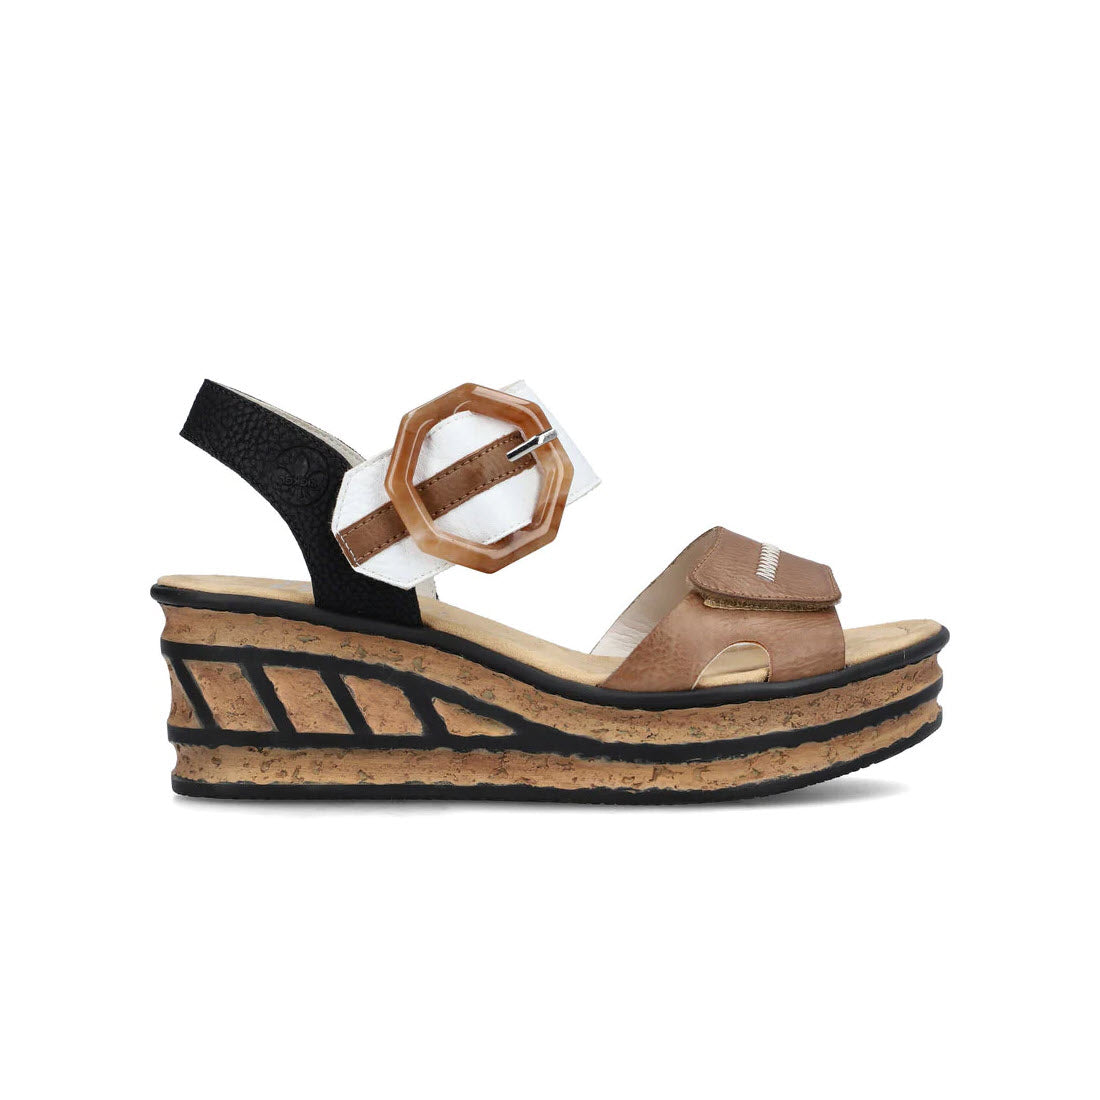 A stylish wedge sandal perfect for summer holidays, with a black and tan color scheme, featuring a large geometric buckle, cork-like layered sole, and an adjustable ankle strap. These chic RIEKER BIG BUCKLE WEDGE TAN MULTI - WOMENS by Rieker ensure both comfort and style in every step.